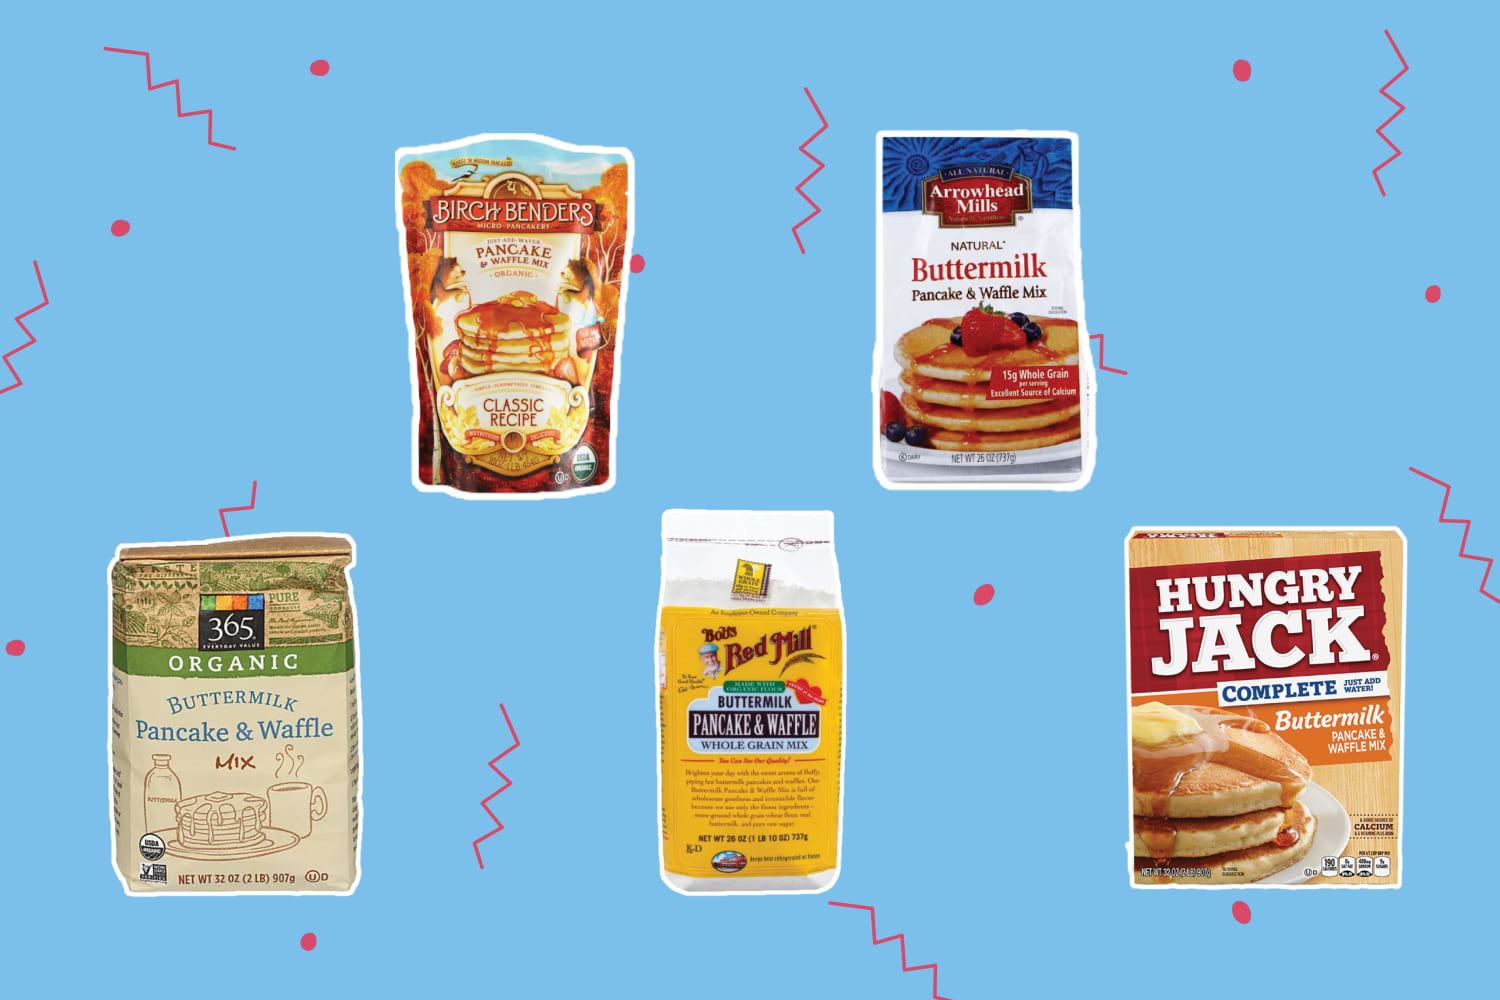 Hungry Jack - Our pancake mix can be used in so many ways